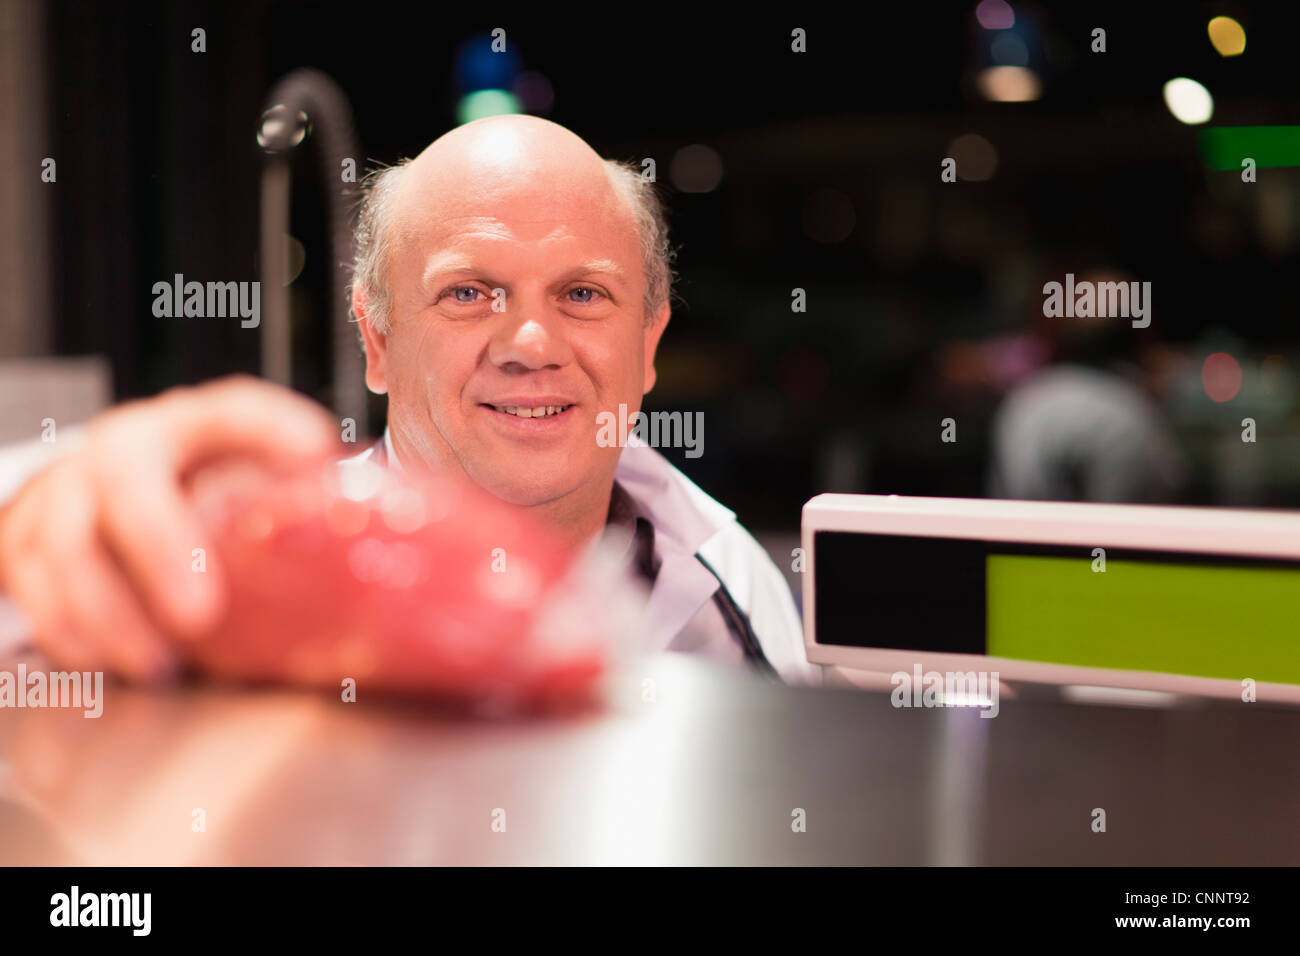 Butcher weighing meat Stock Photo